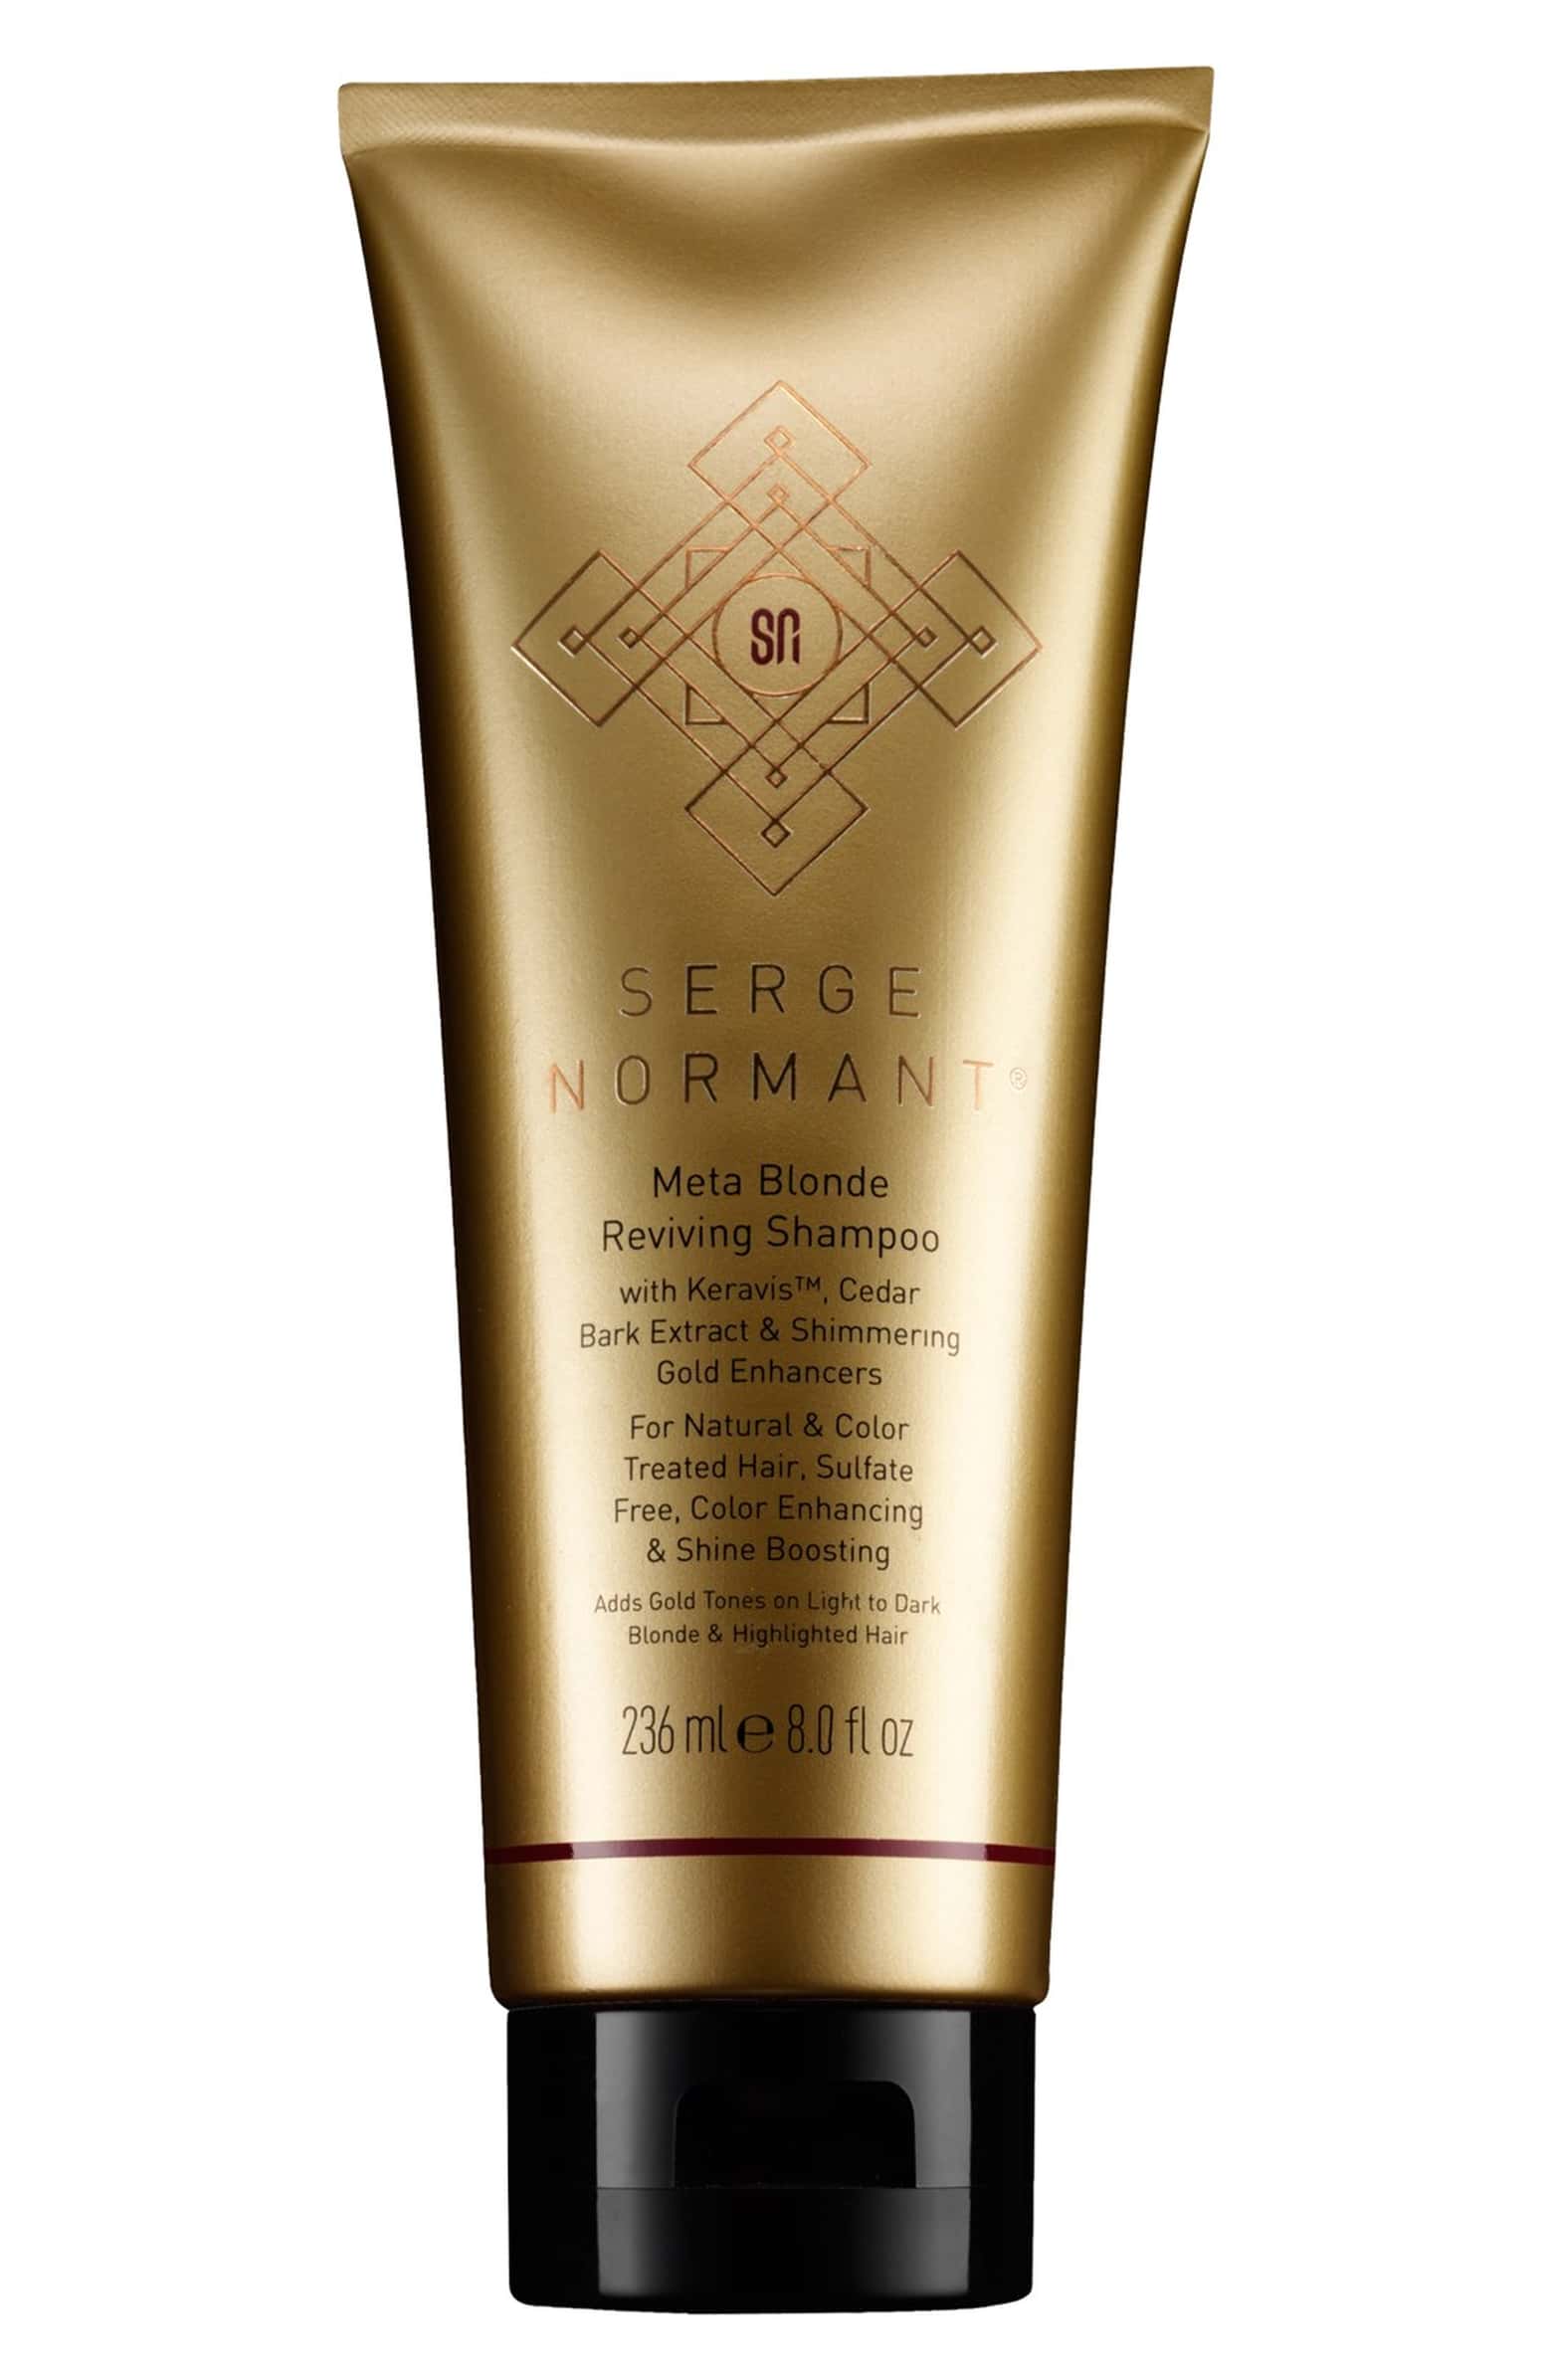 Shop Serge Normant Meta Blonde Reviving Shampoo at New London Pharmacy. Sulfate-free. This shampoo is designed to give hair subtle gold tones to enhance color and vibrancy, extending time between salon visits. Free shipping on all orders of $50.00